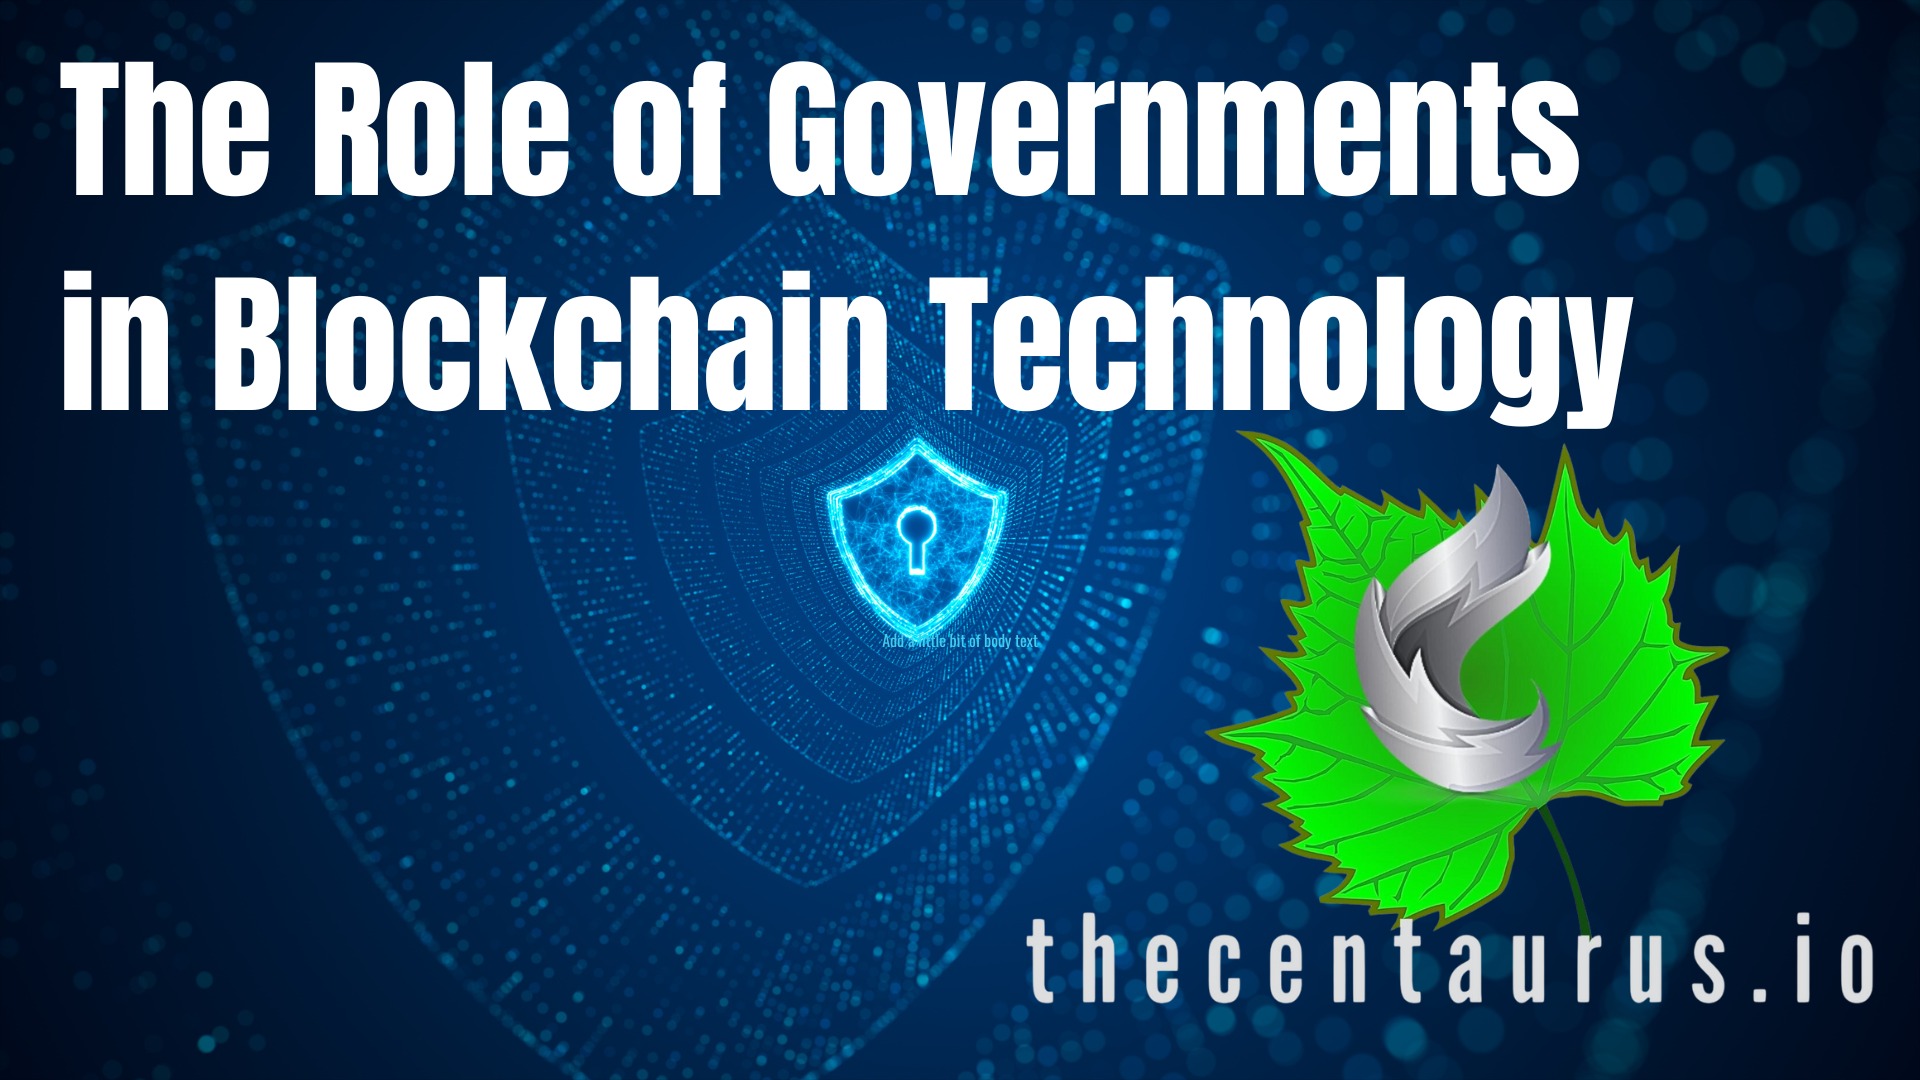 THE ROLE OF GOVERNMENTS IN BLOCKCHAINTECHNOLOGY AND CRYPTOCURRENCIES !!